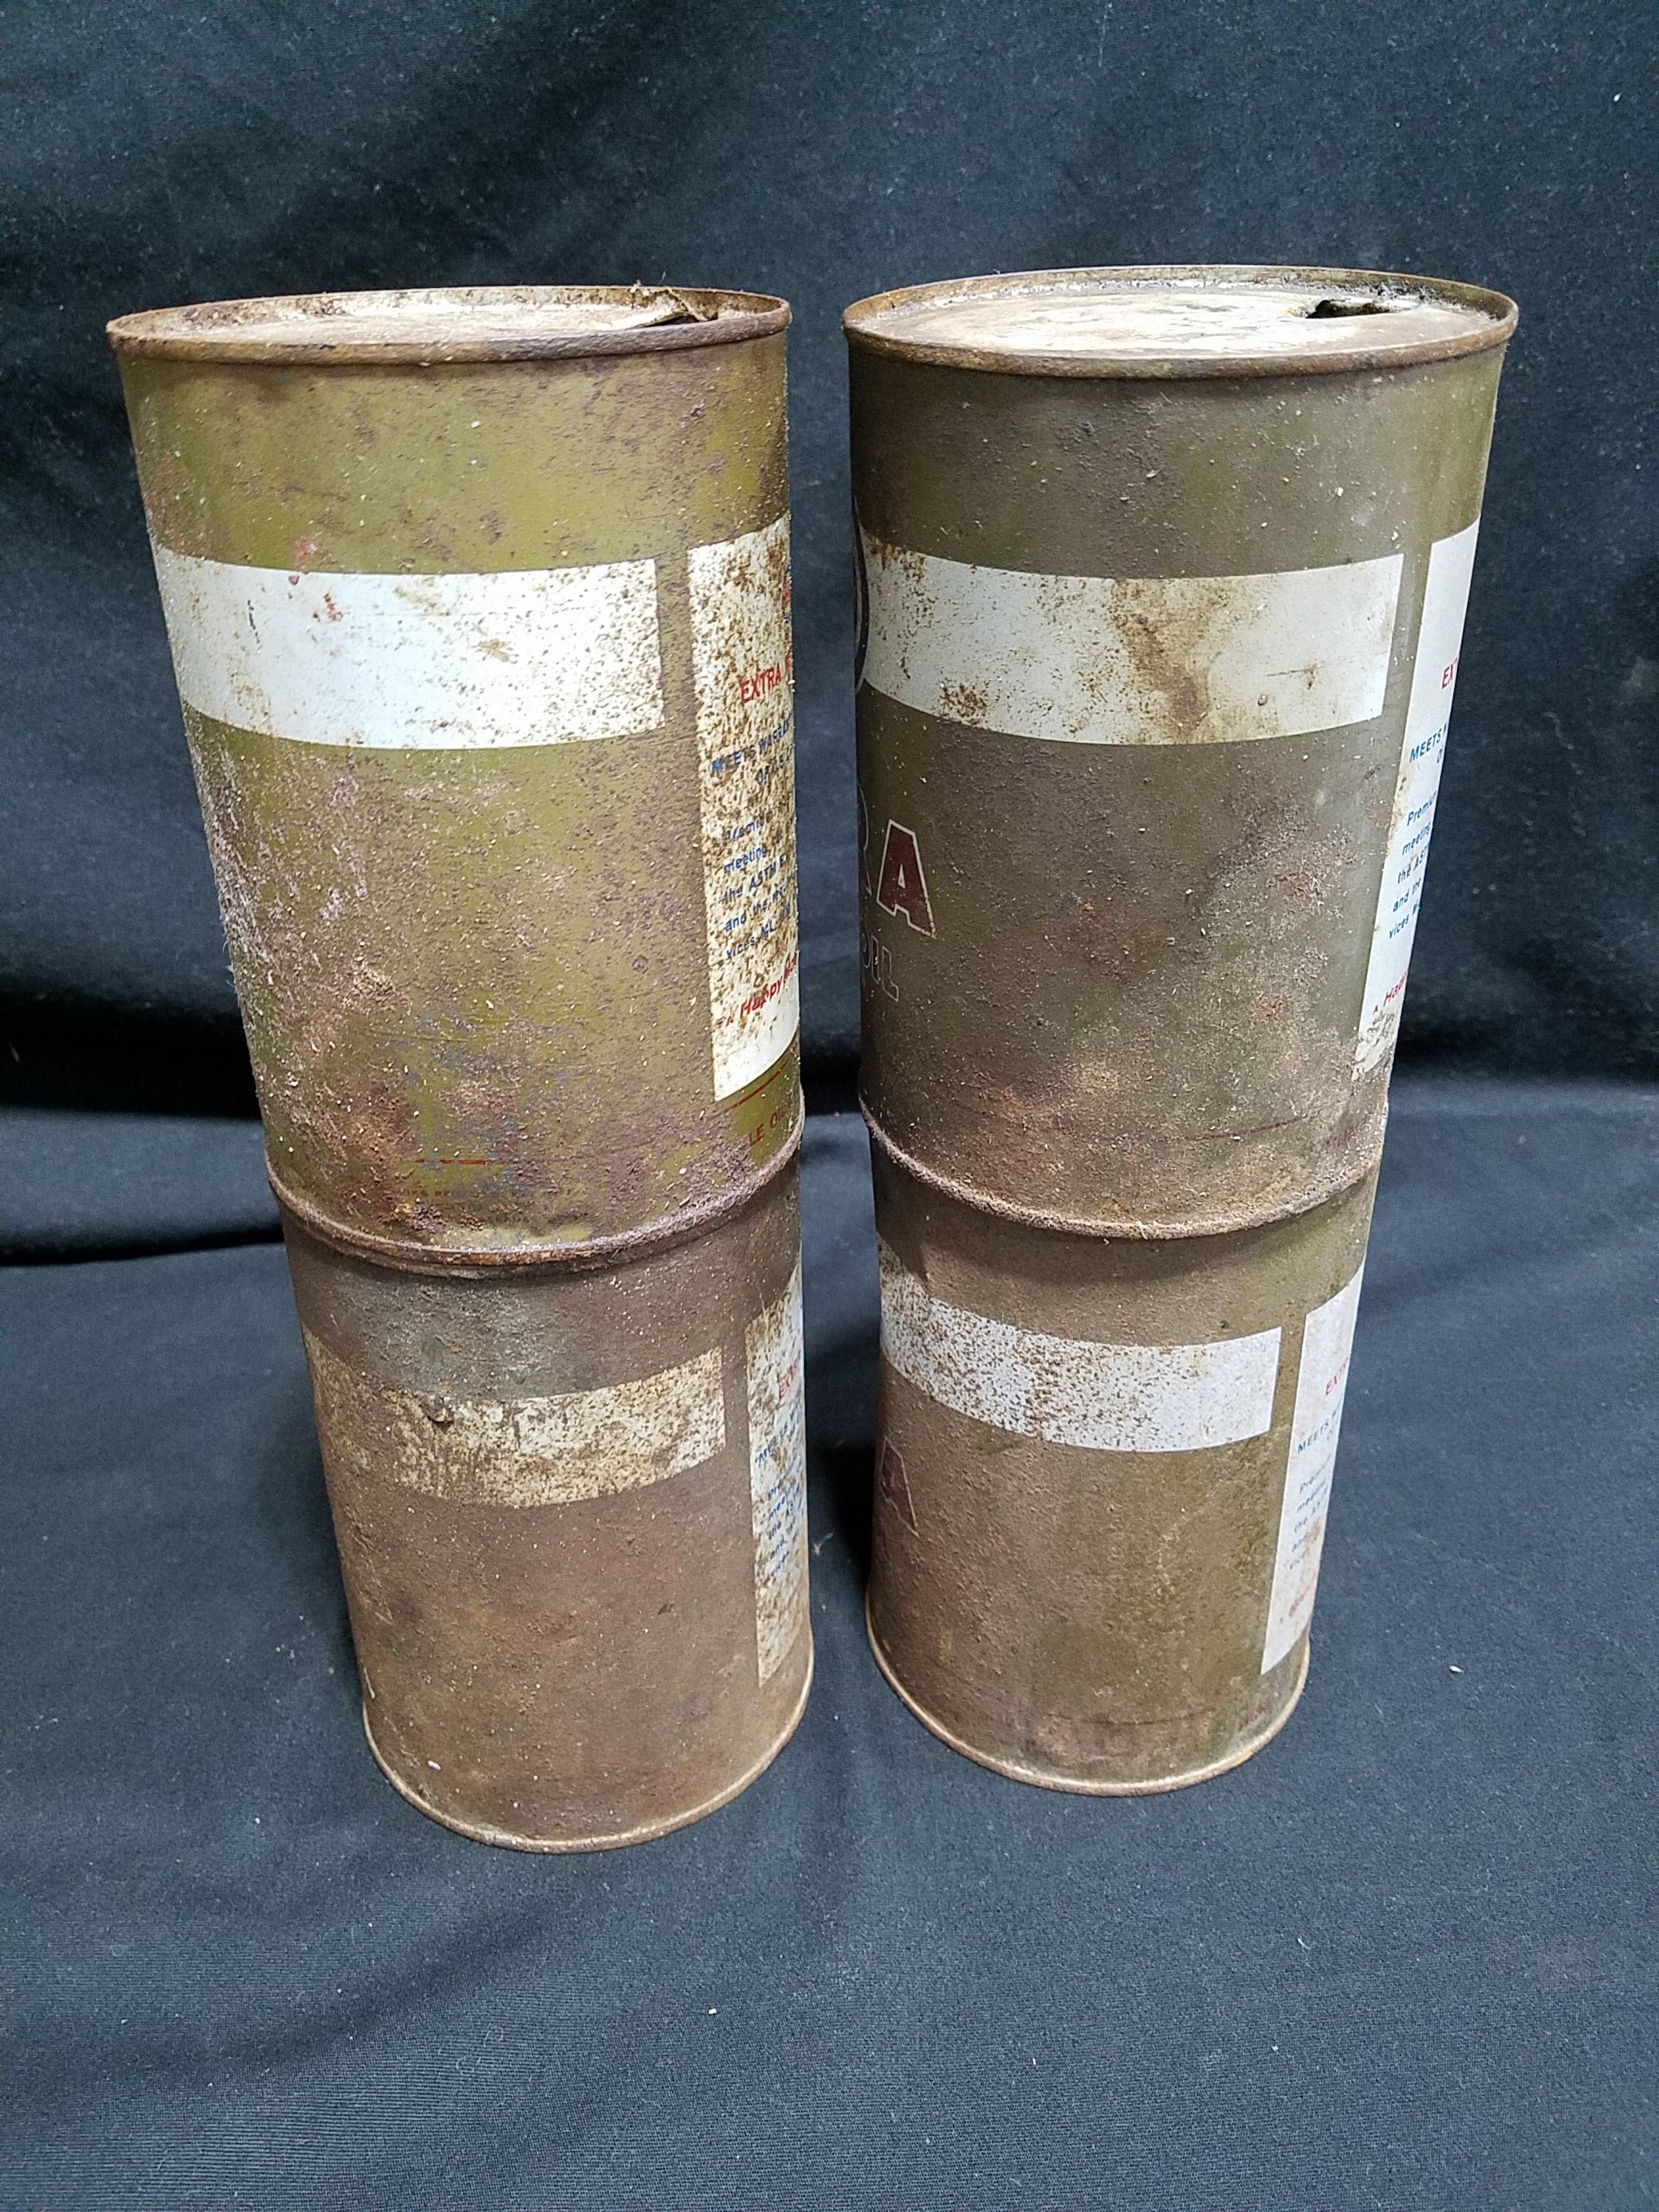 Esso Quart Extra Motor Oil Cans (Lot of 4)